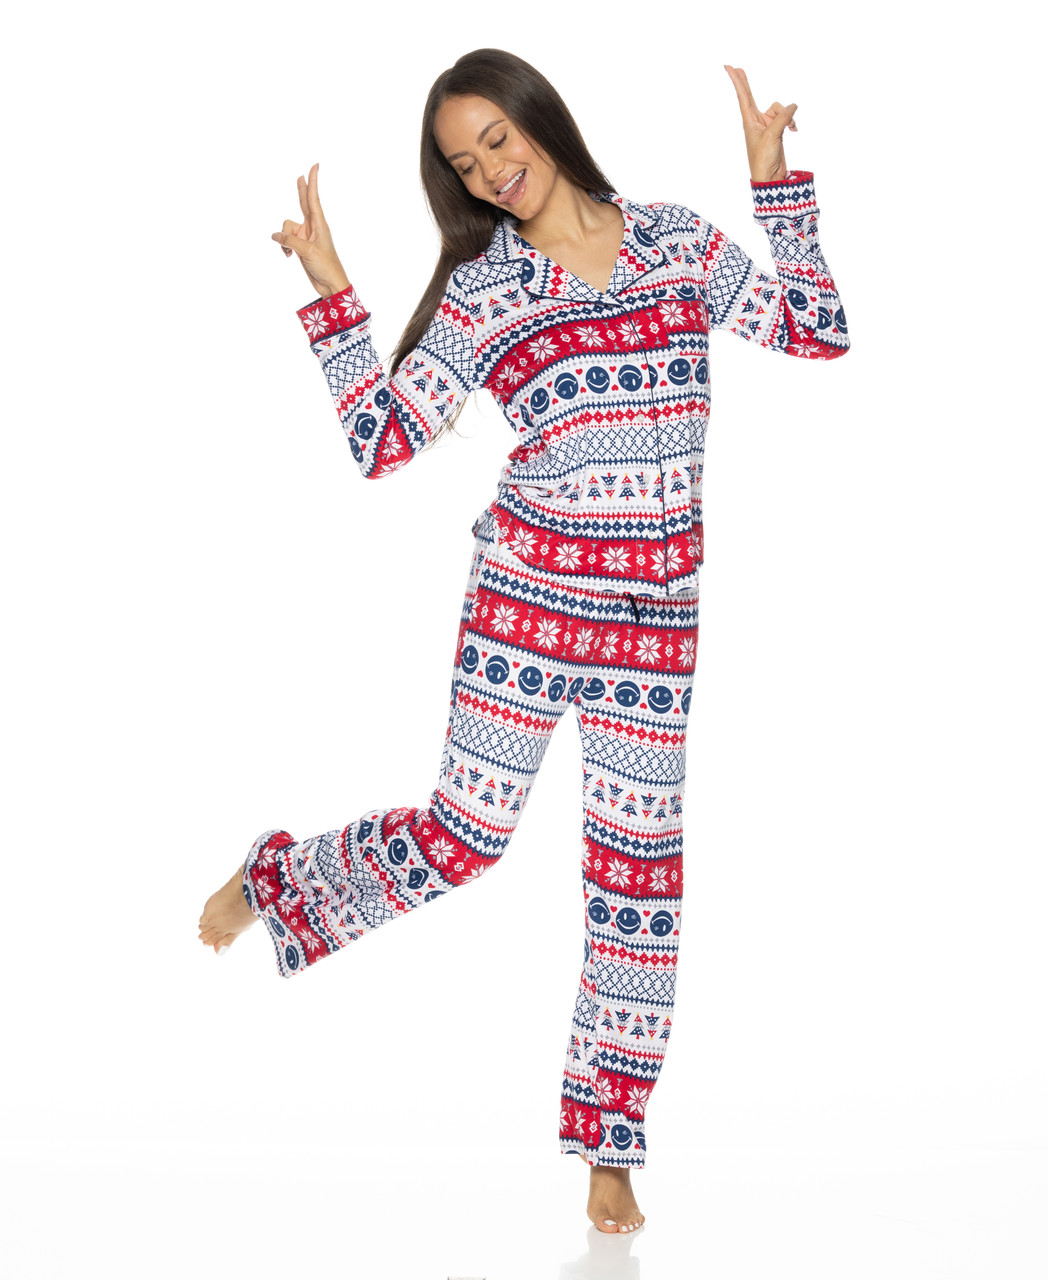 NEW Holiday pajama sets from Colsie 💕 includes long sleeve top, short